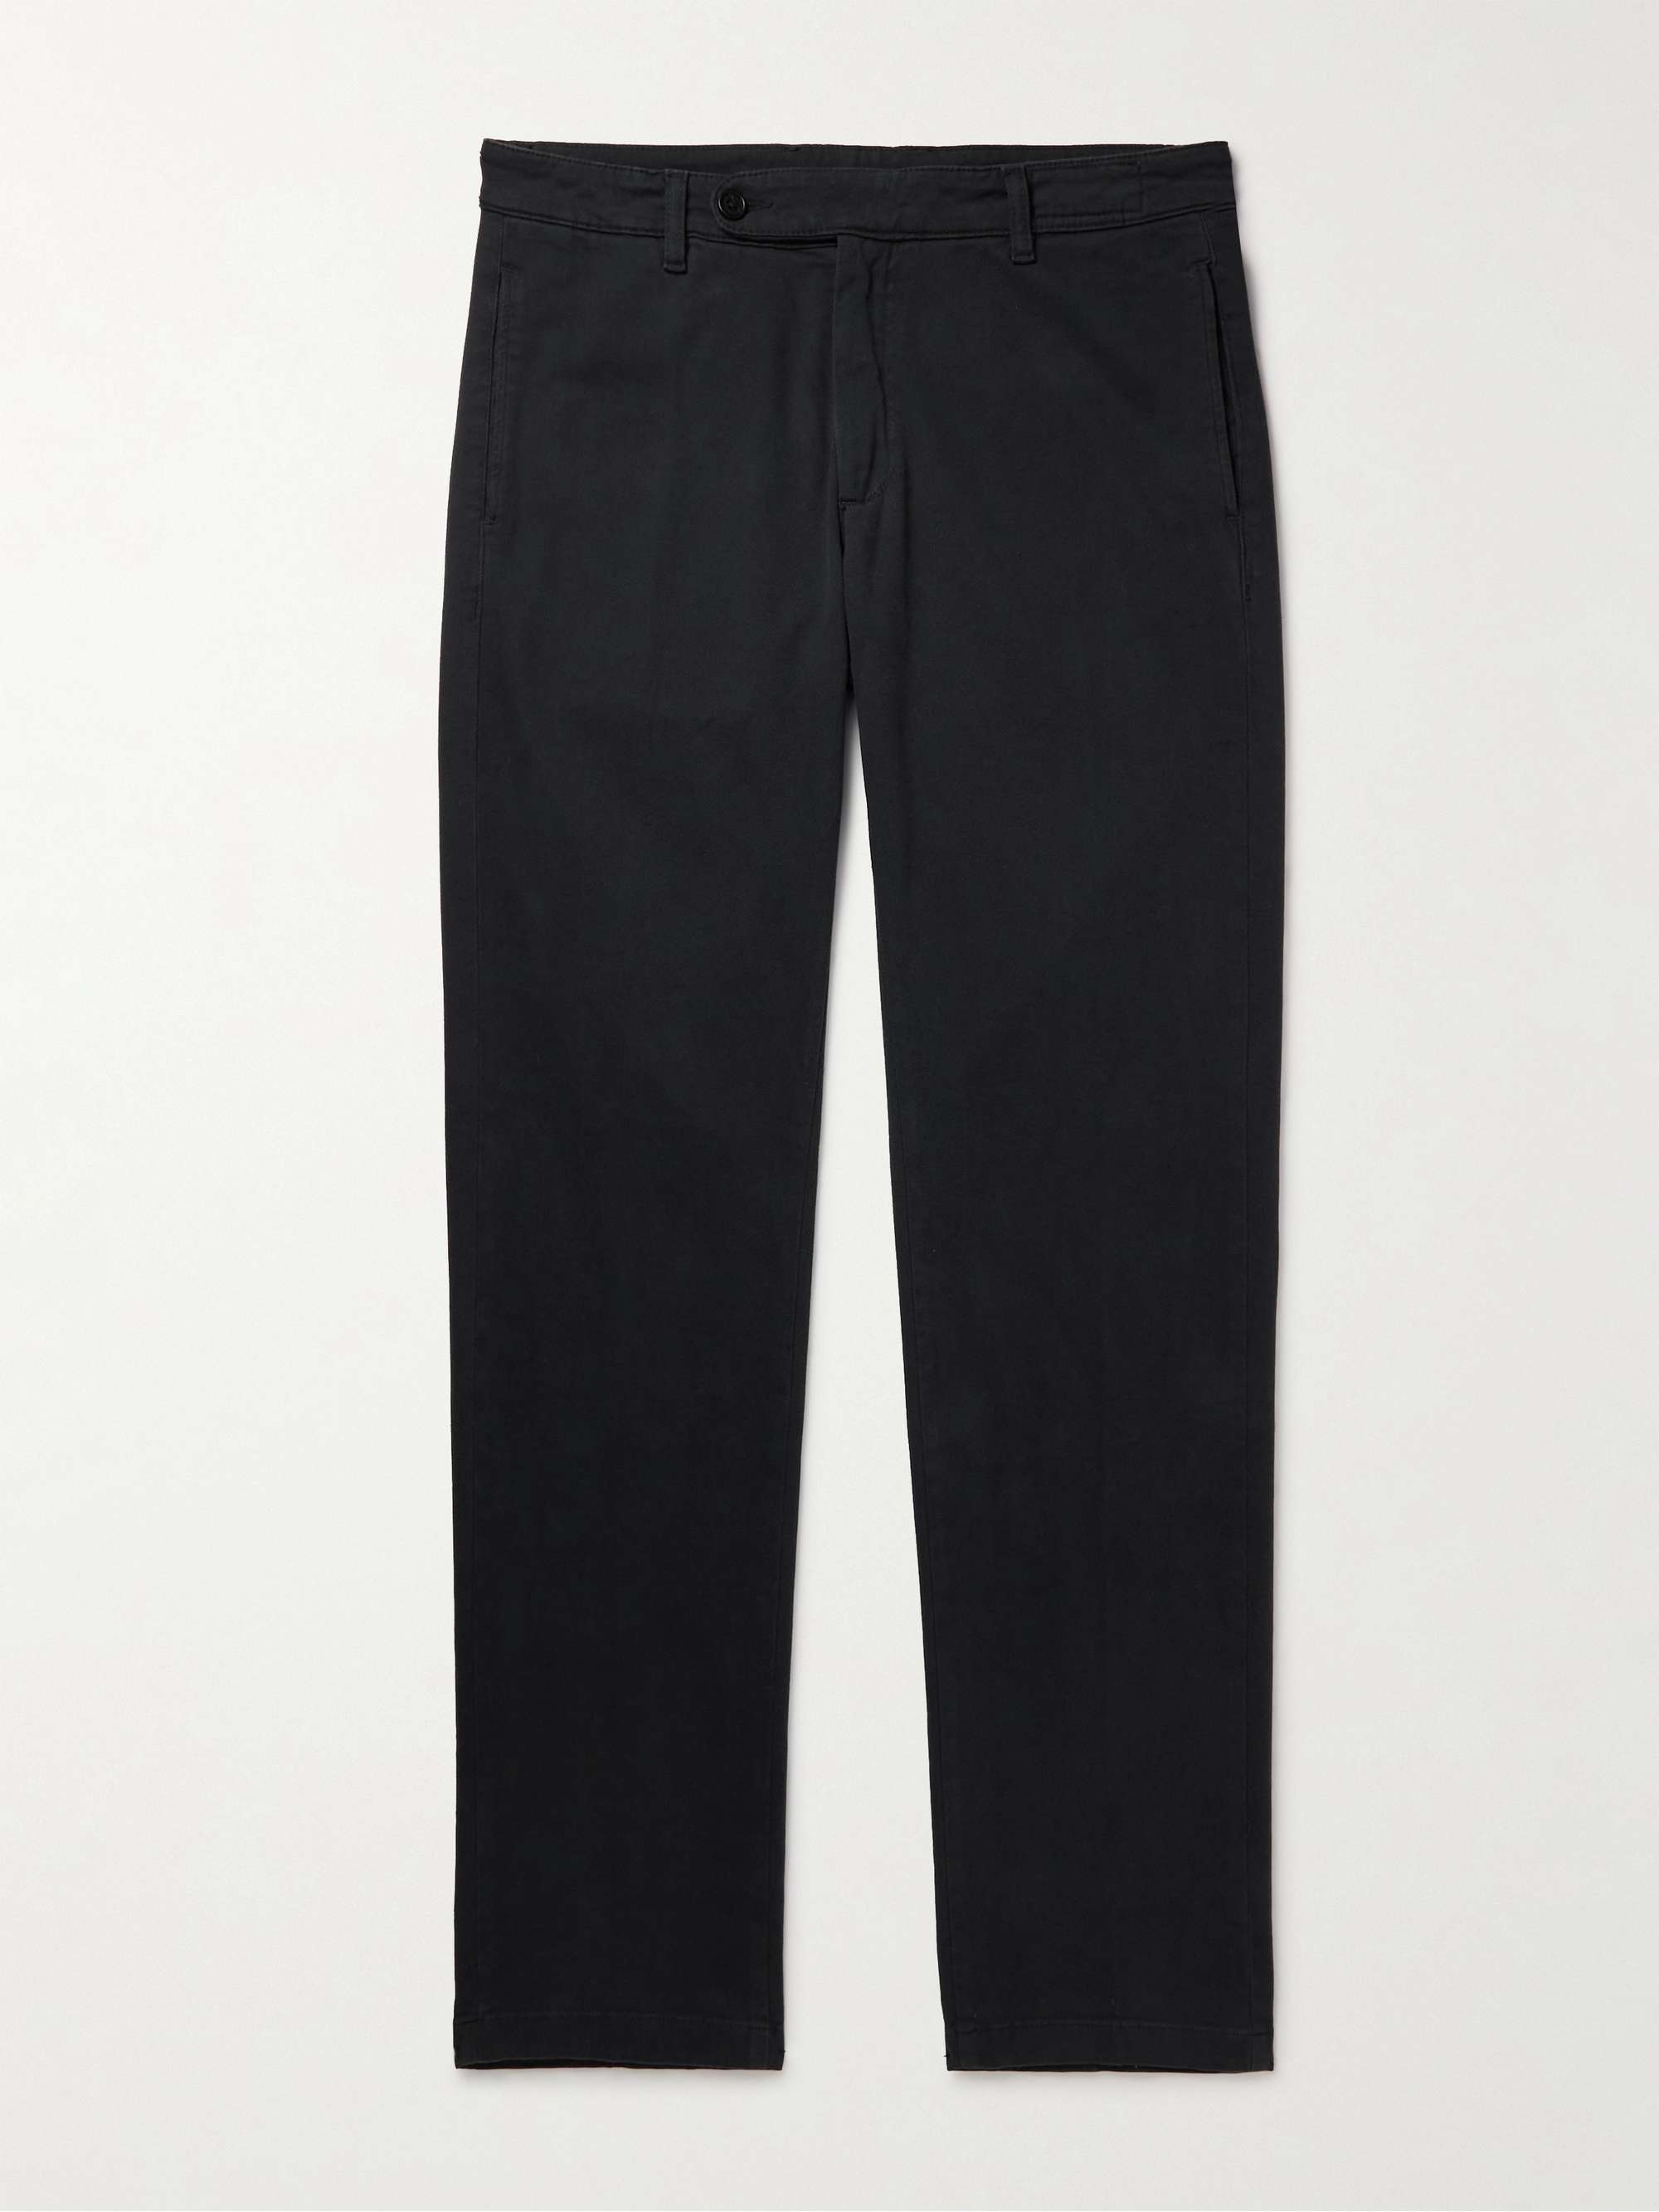 H&M Clothing Pants Chinos 2-pack Cotton Chinos 